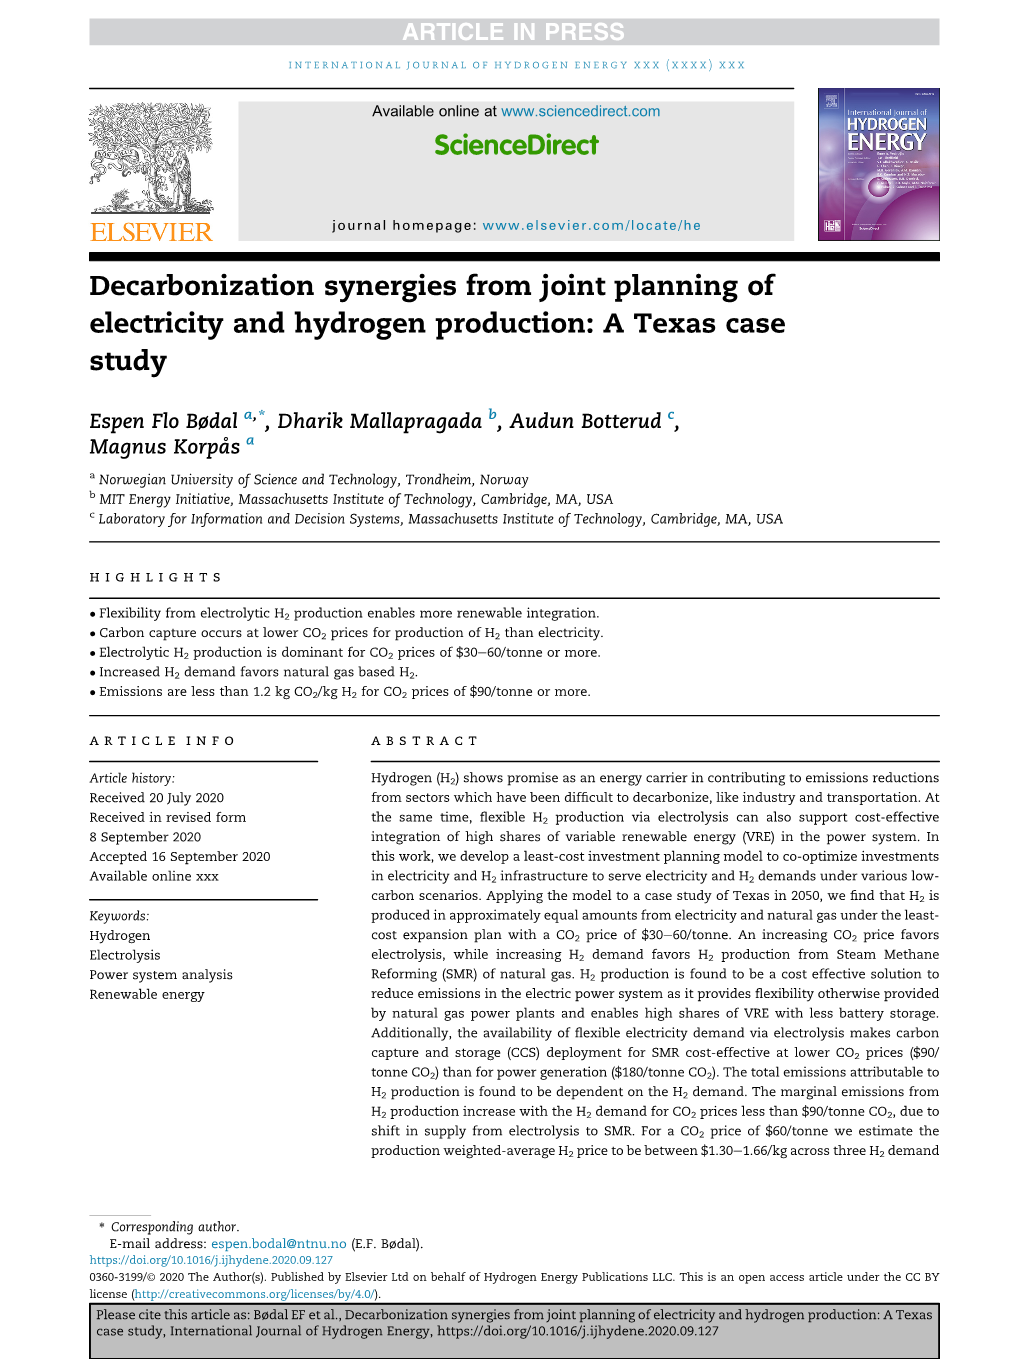 Decarbonization Synergies from Joint Planning of Electricity and Hydrogen Production: a Texas Case Study